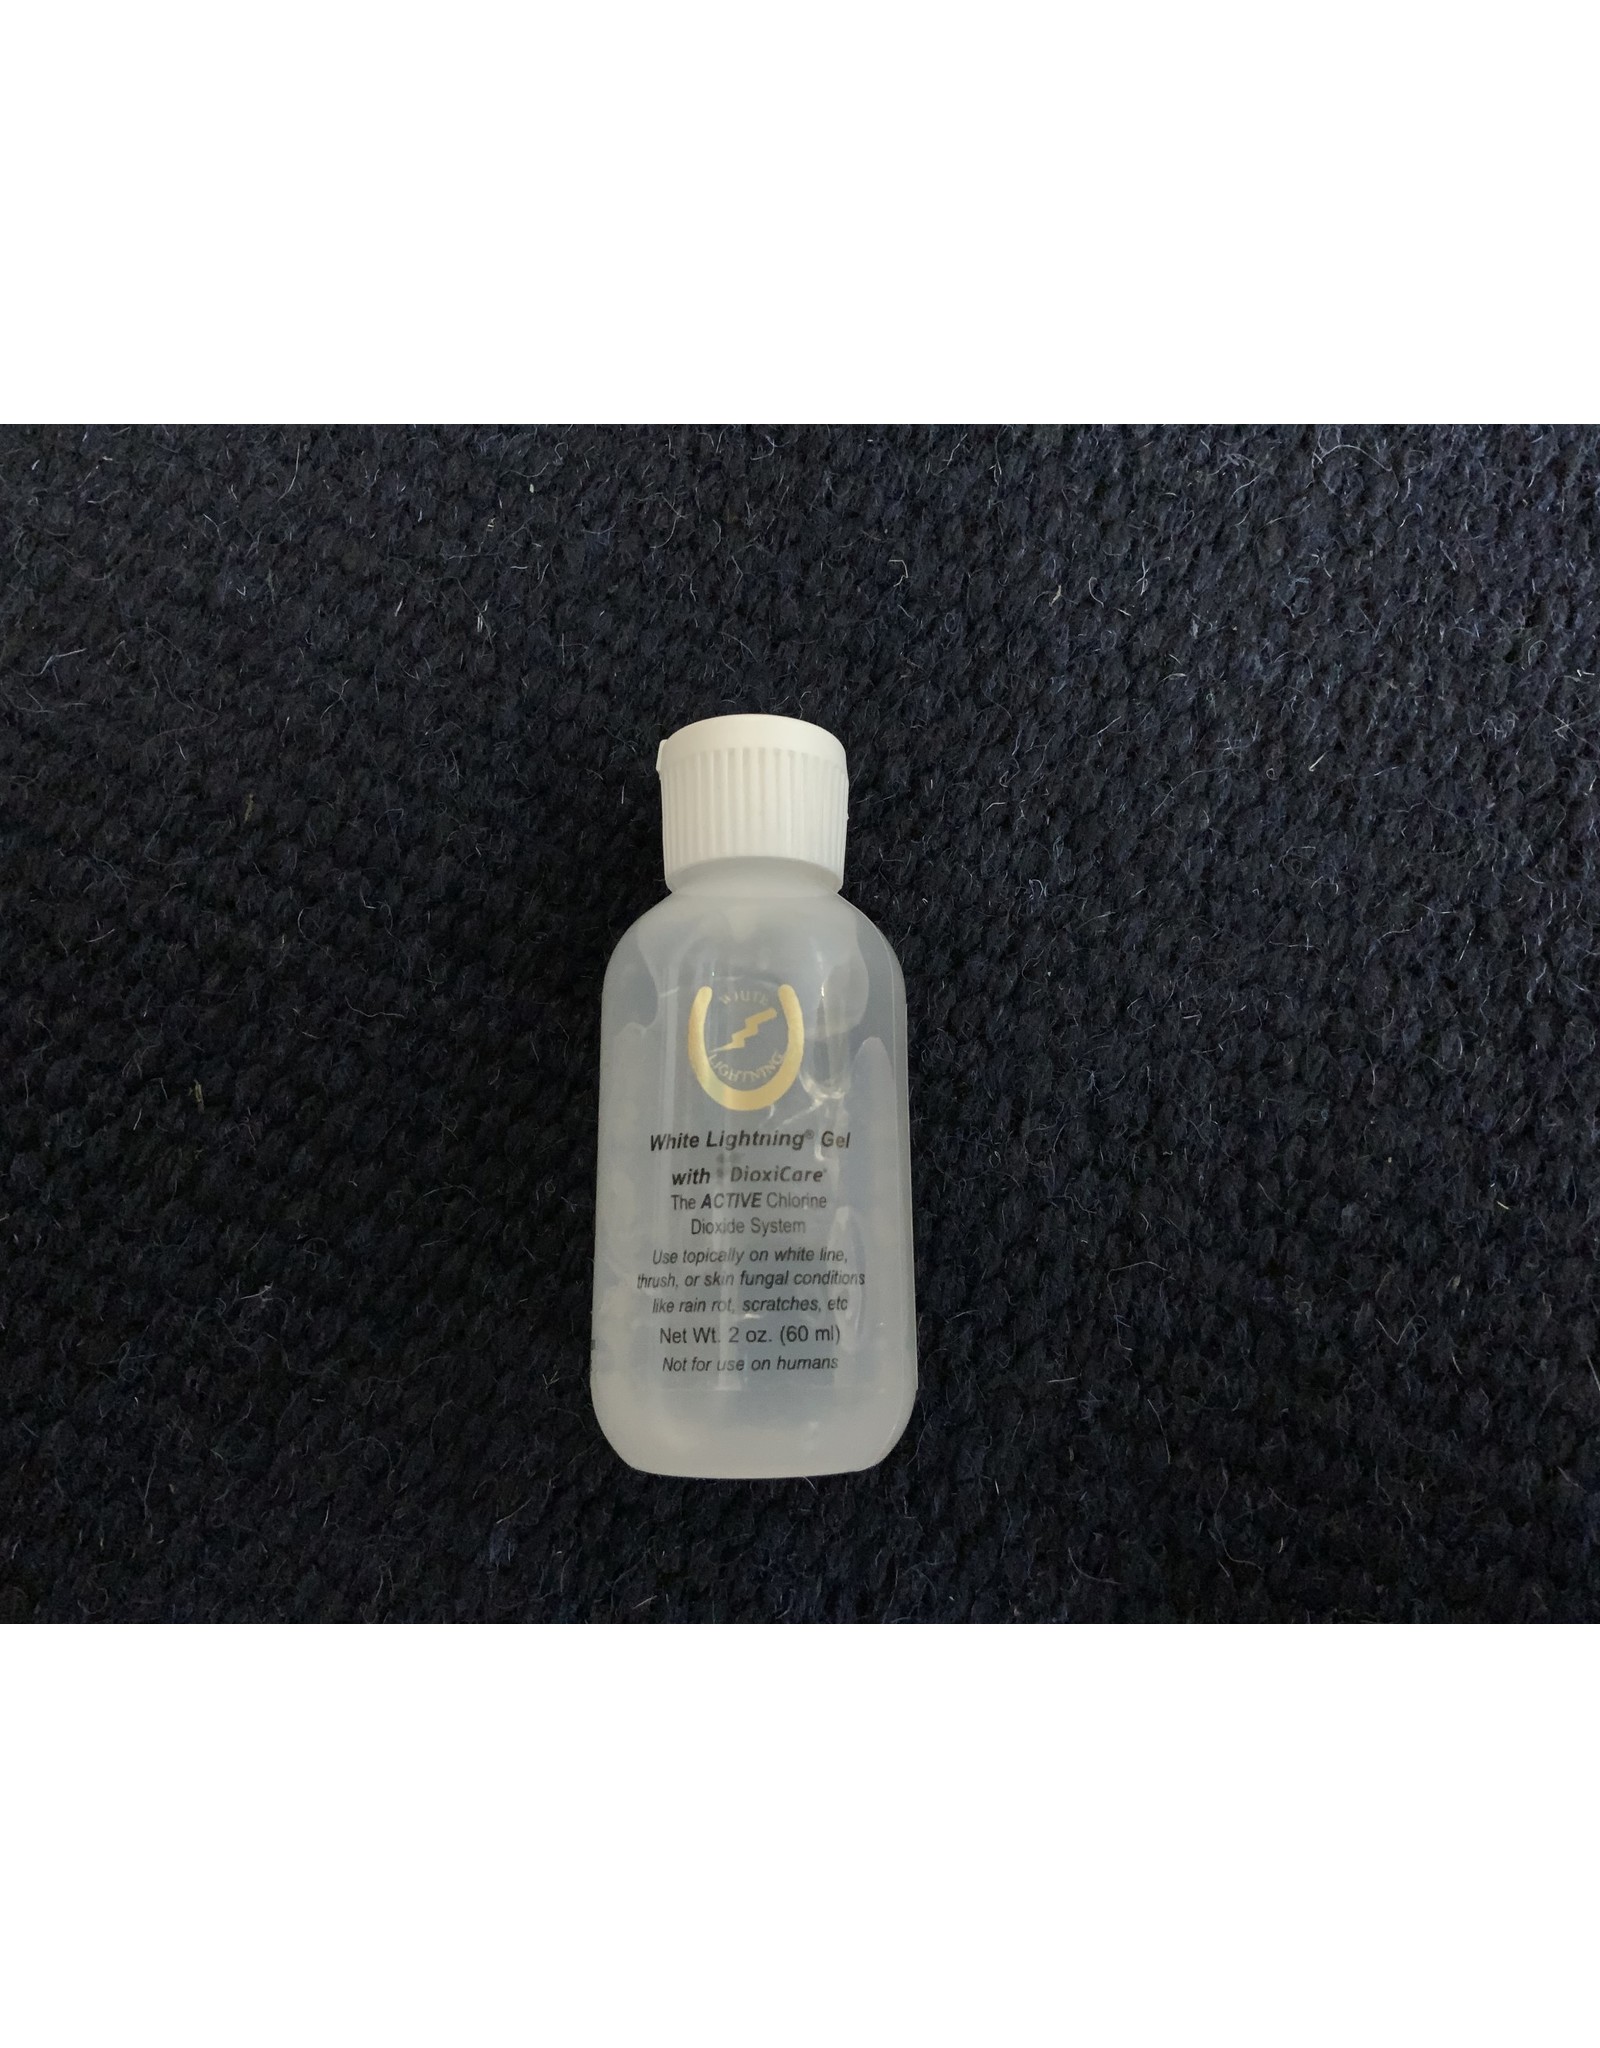 White Lightening Gel - 30 ml Chlorine Dioxide Topical use white line, thrush, skin fungal conditions: rain rot, scratches, etc.